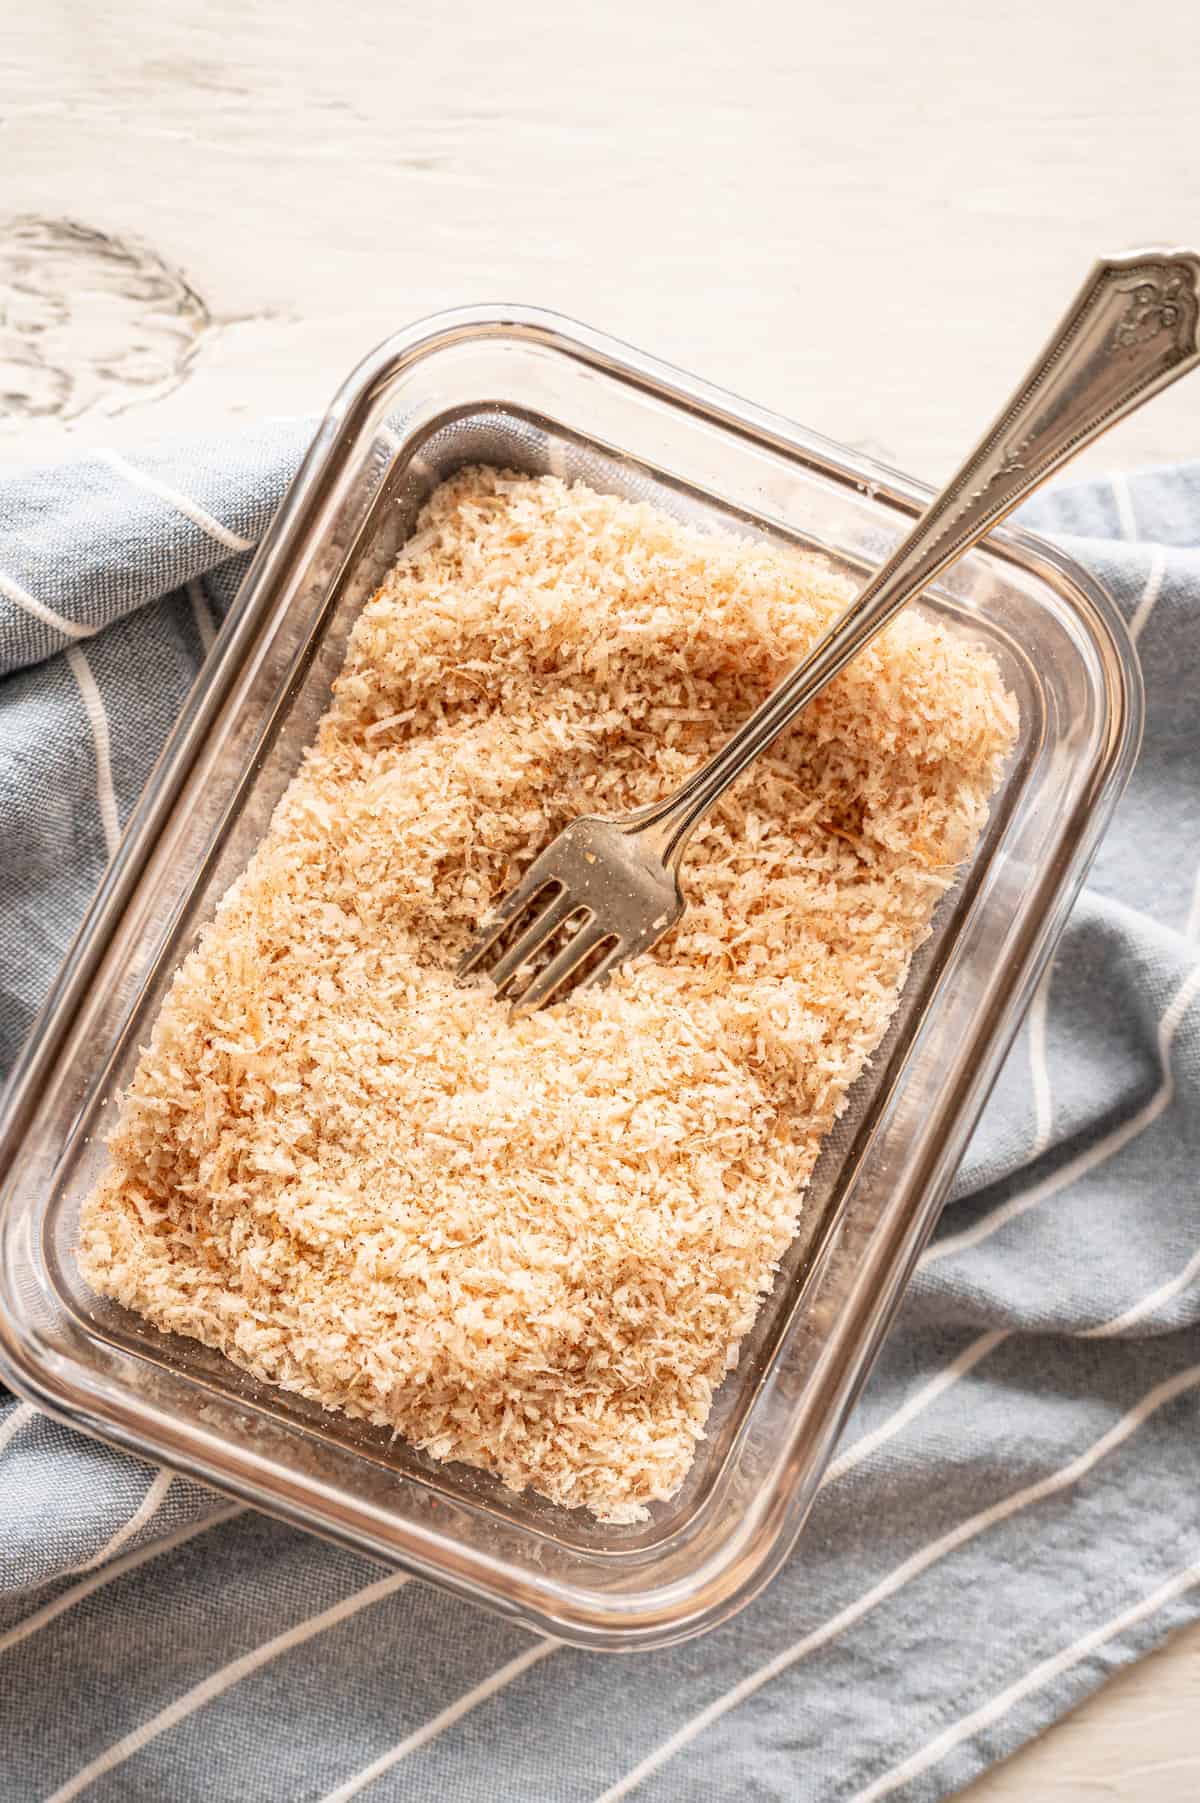 Breadcrumb coating mixture in a dish with a fork.